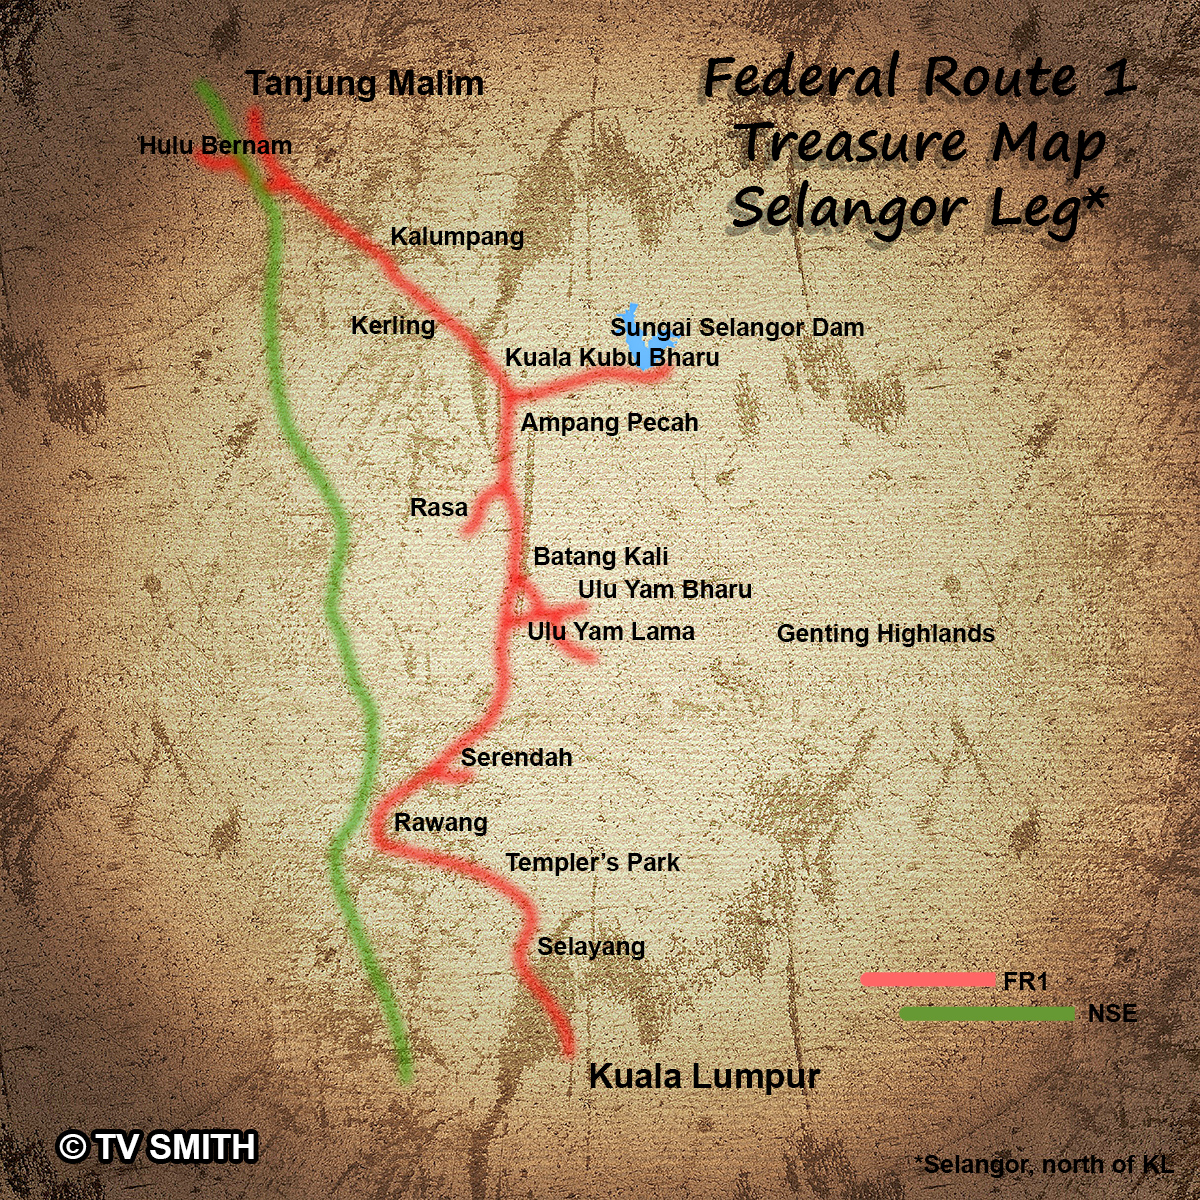 Map – Federal Route 1, North of KL